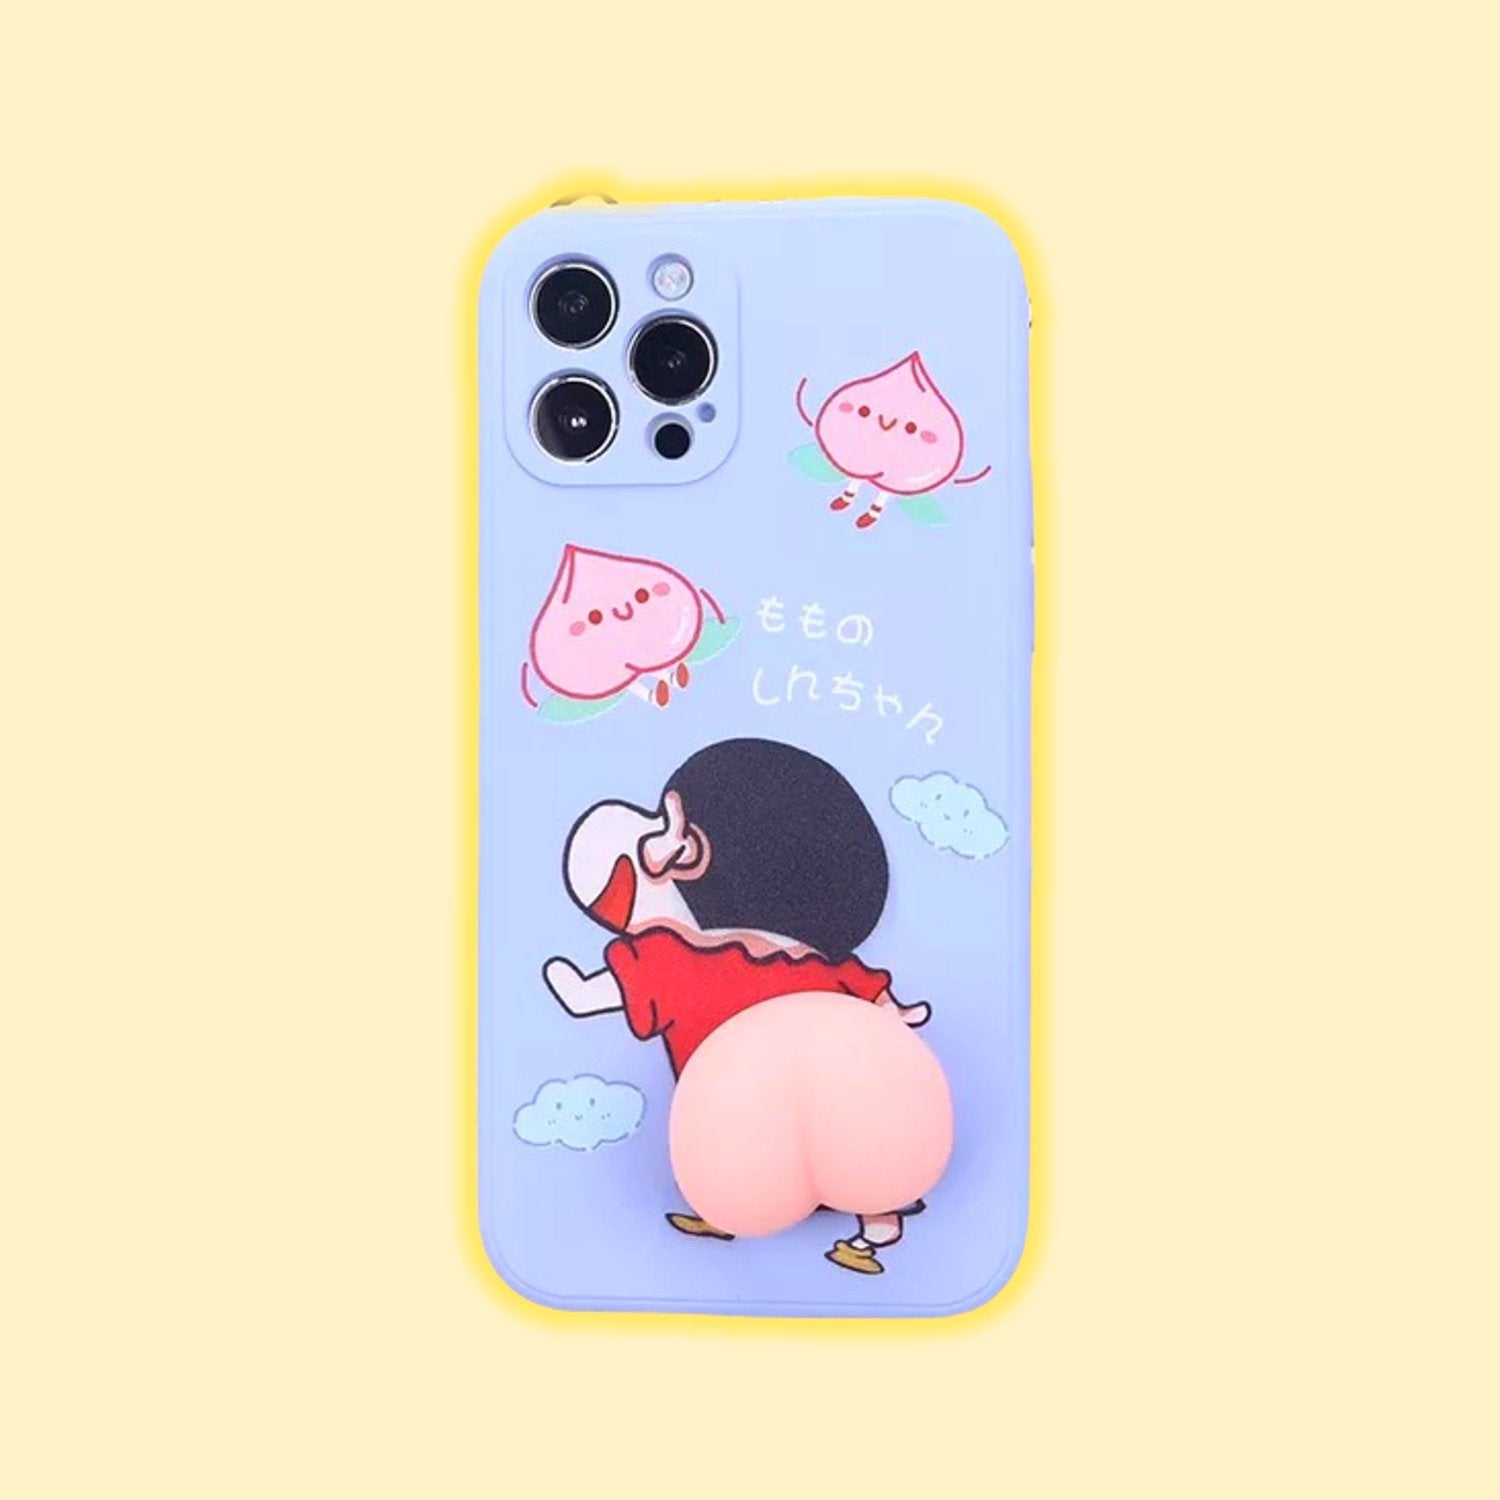 Cute Release Stress Phone Case for iPhone